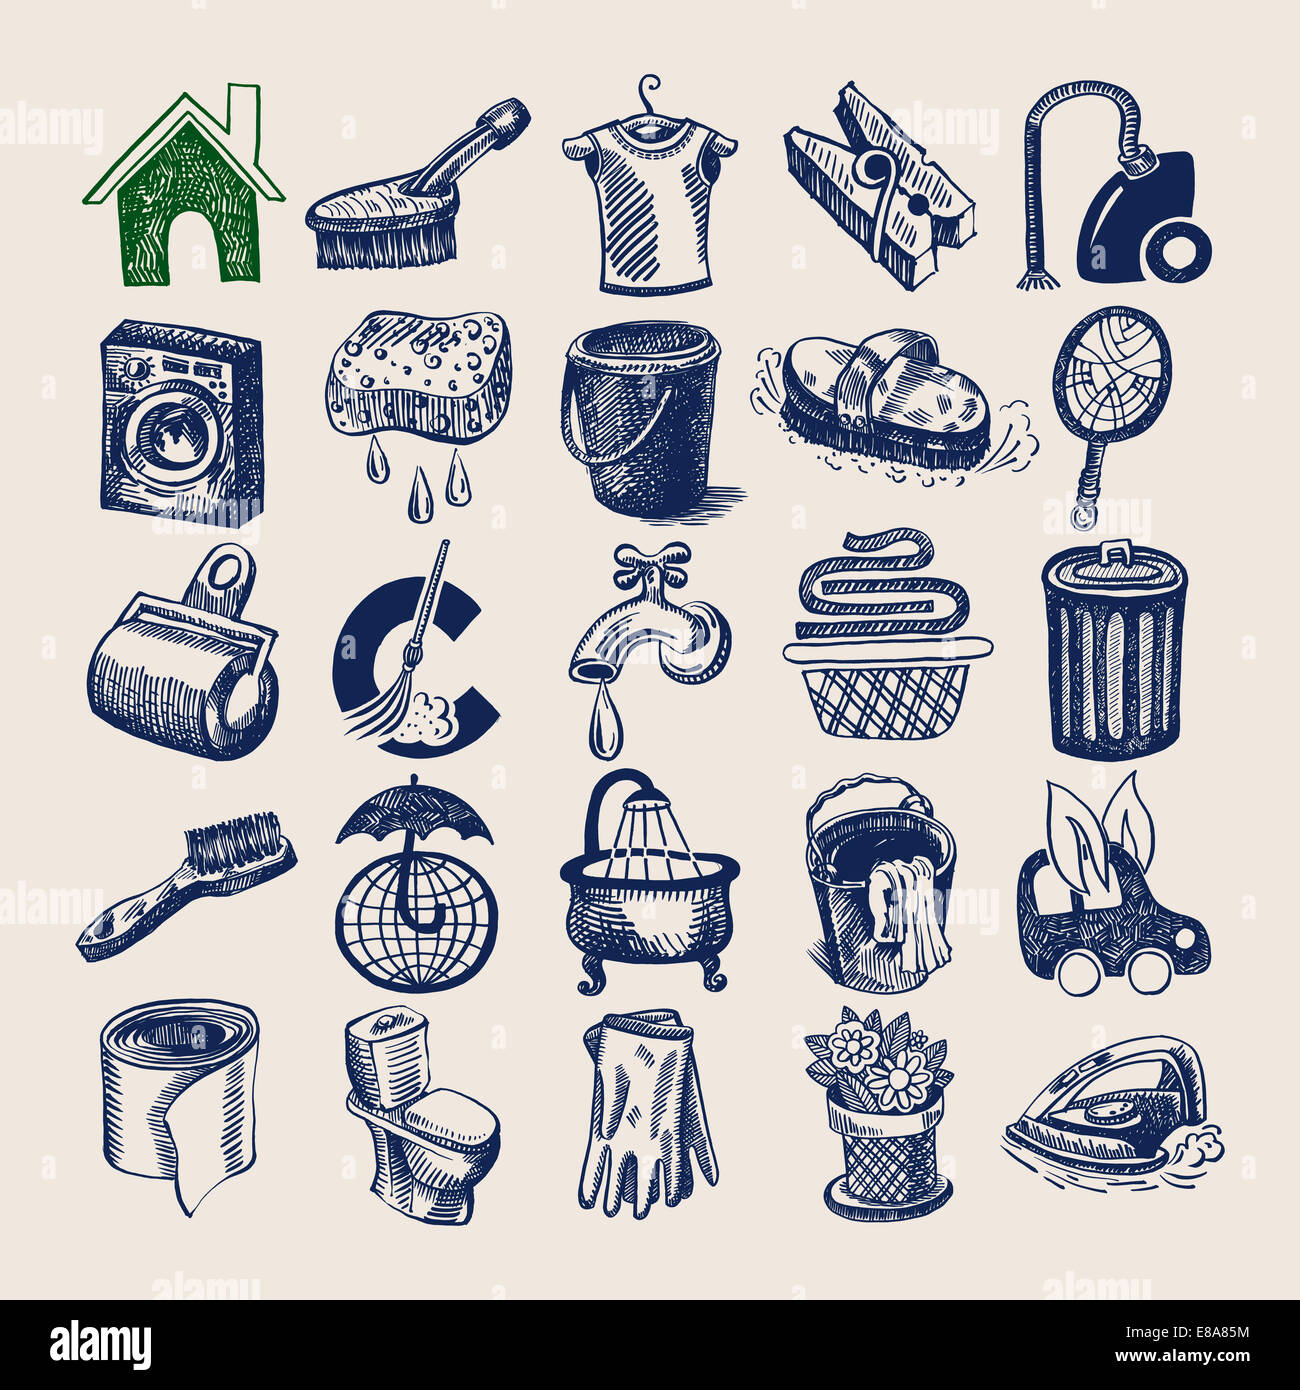 25 hand drawing doodle icon set, cleaning and hygiene service Stock Photo